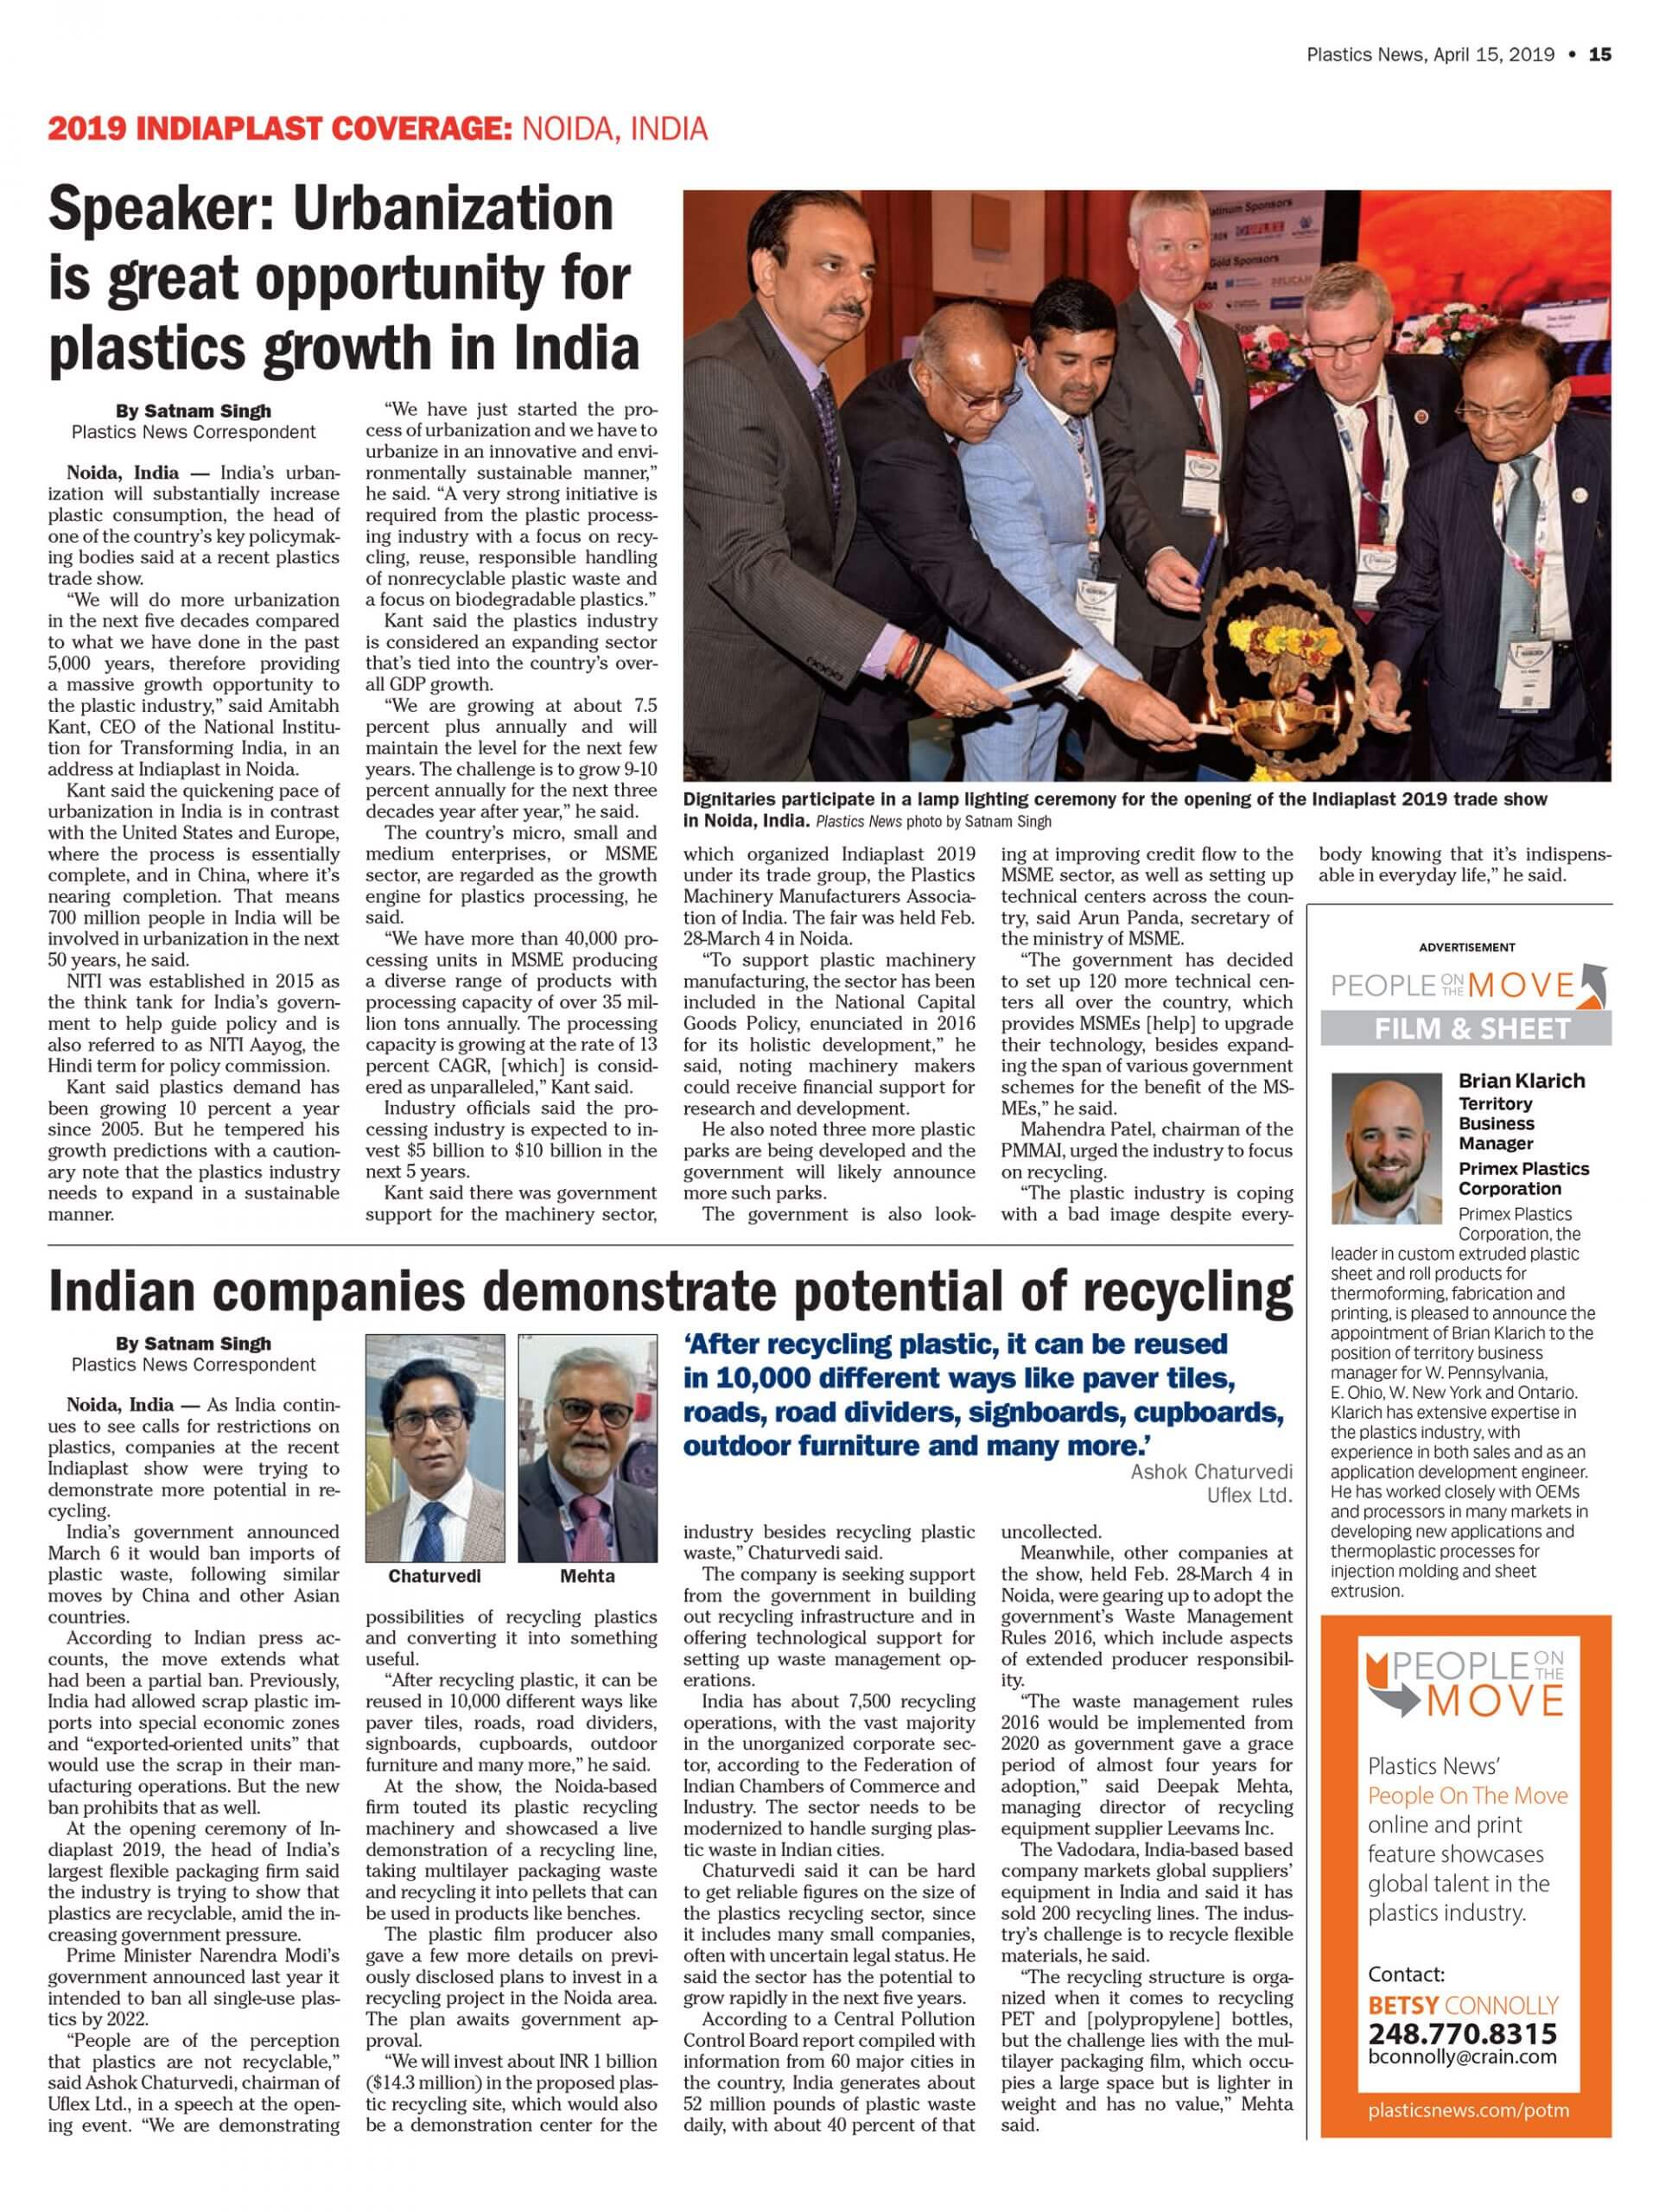 Indian Companies Demonstrate Potential of Recycling @ India Plast 2019 – Reports Plastics News | April 2019 Print Edition